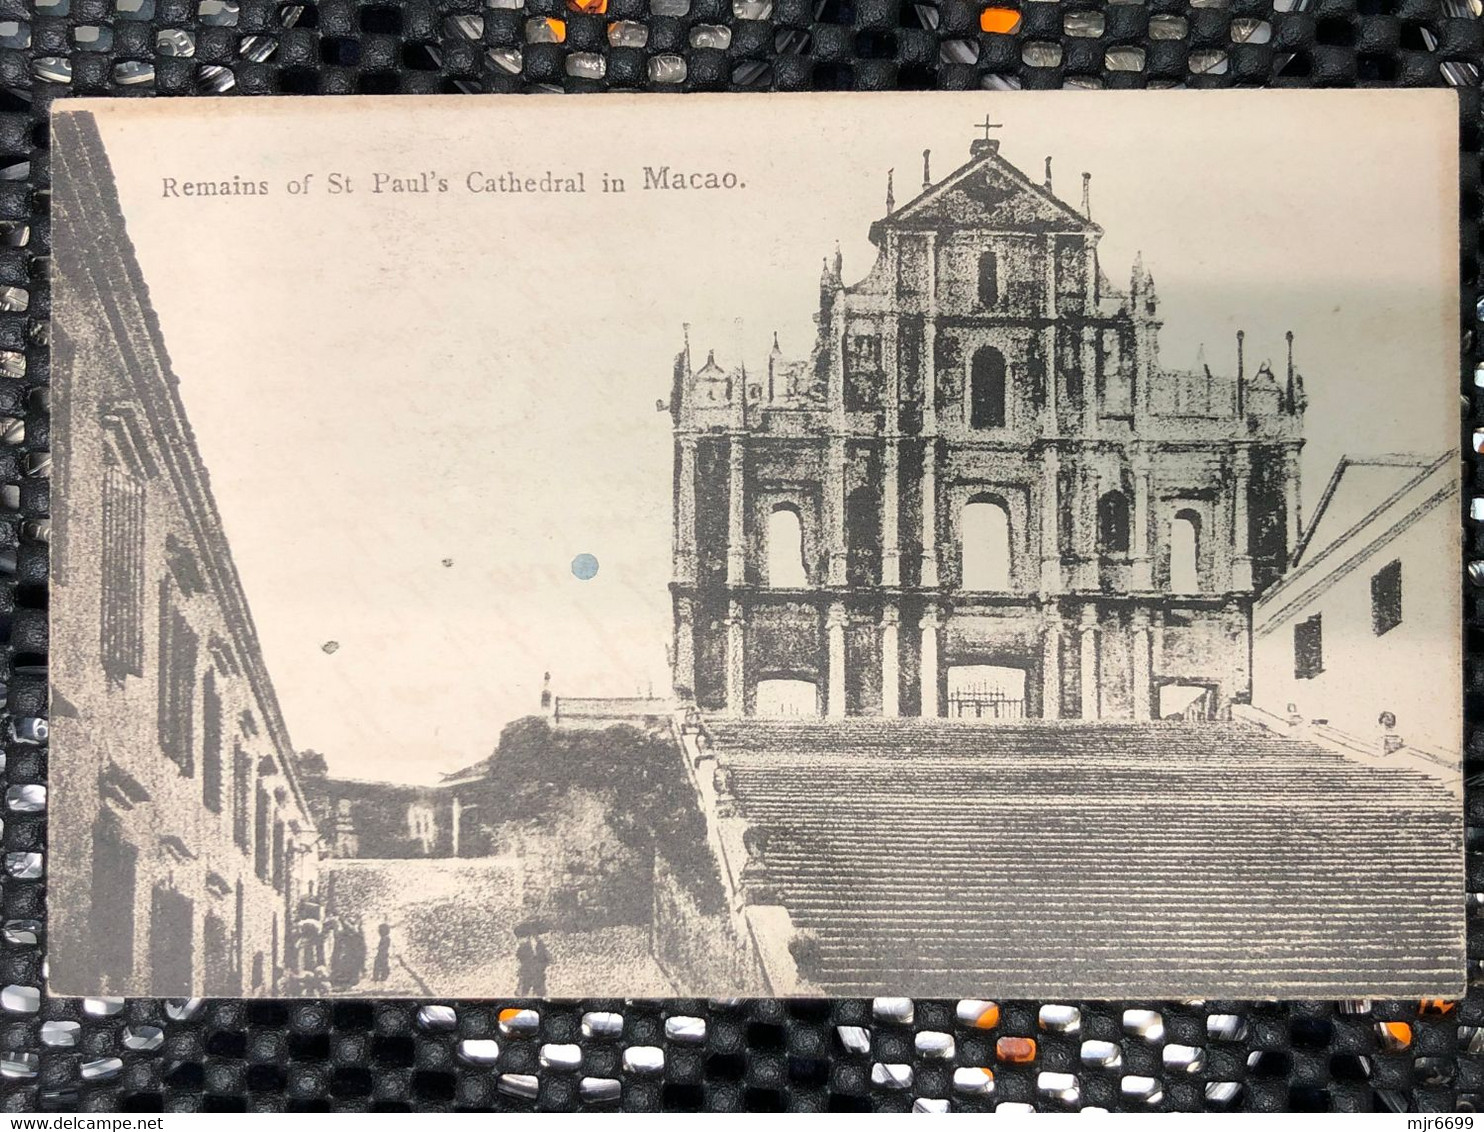 MACAU 1900'S PICTURE POST CARD WITH VIEW OF RUINS OF ST PAUL'S CHURCH/CATHEDRAL - Macau